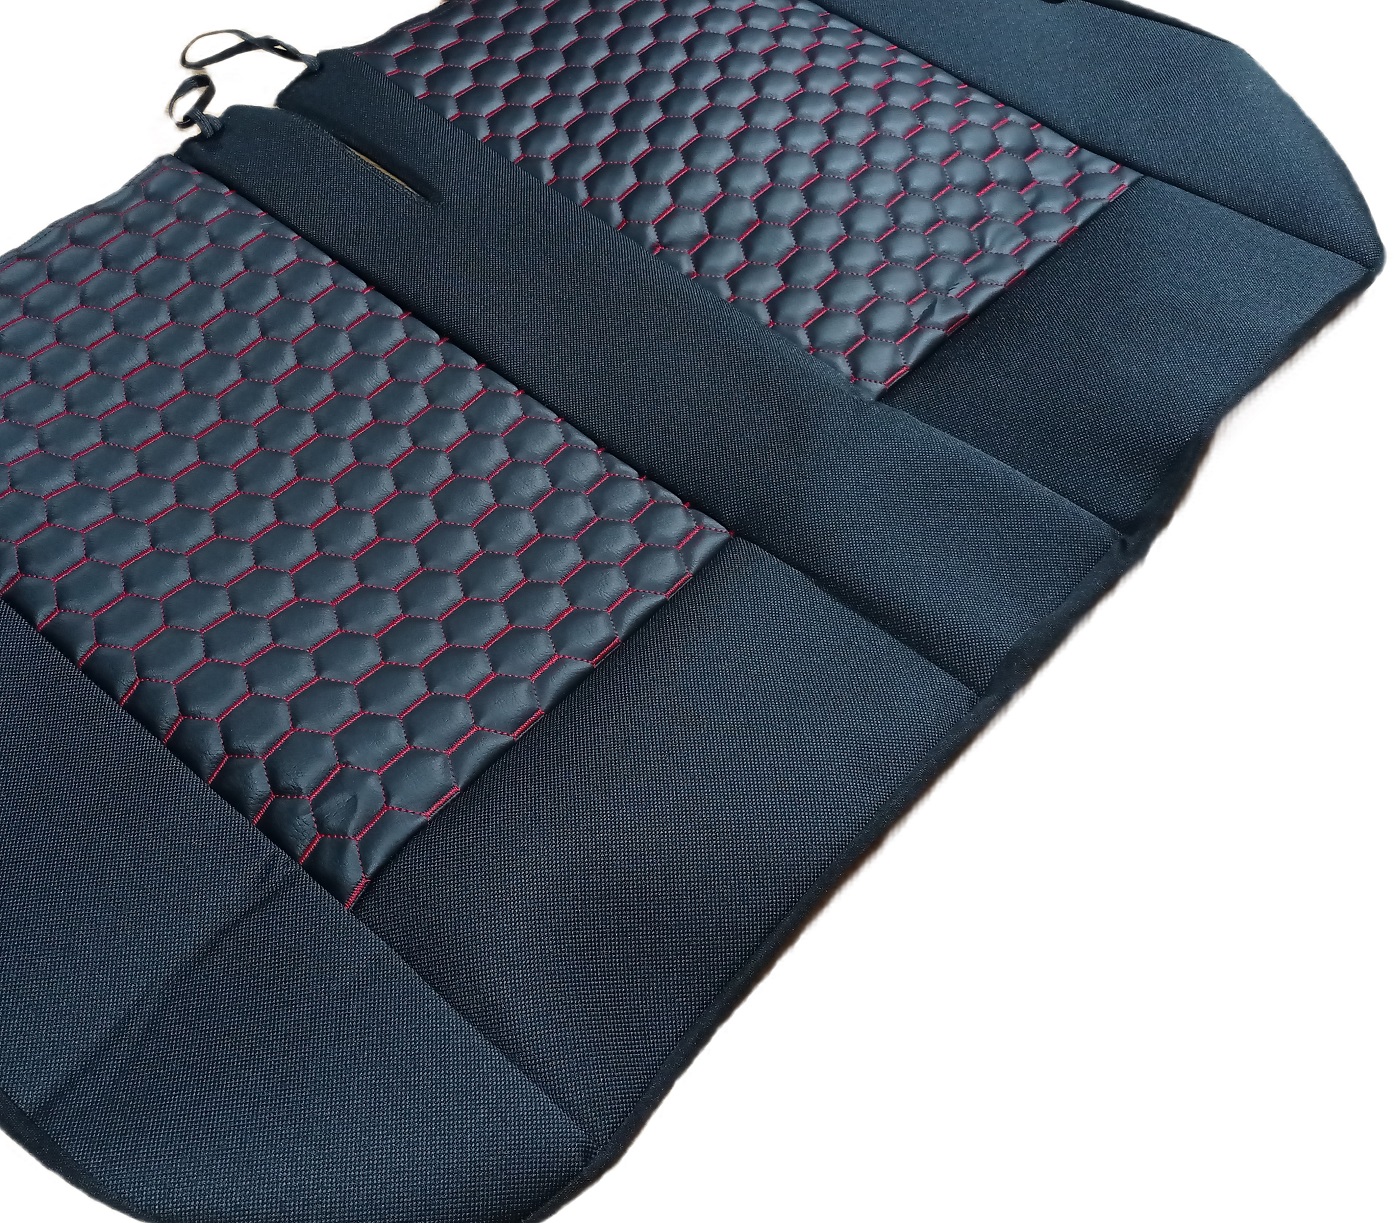 Seat covers for IVECO DAILY Van Black Red Seam Leather